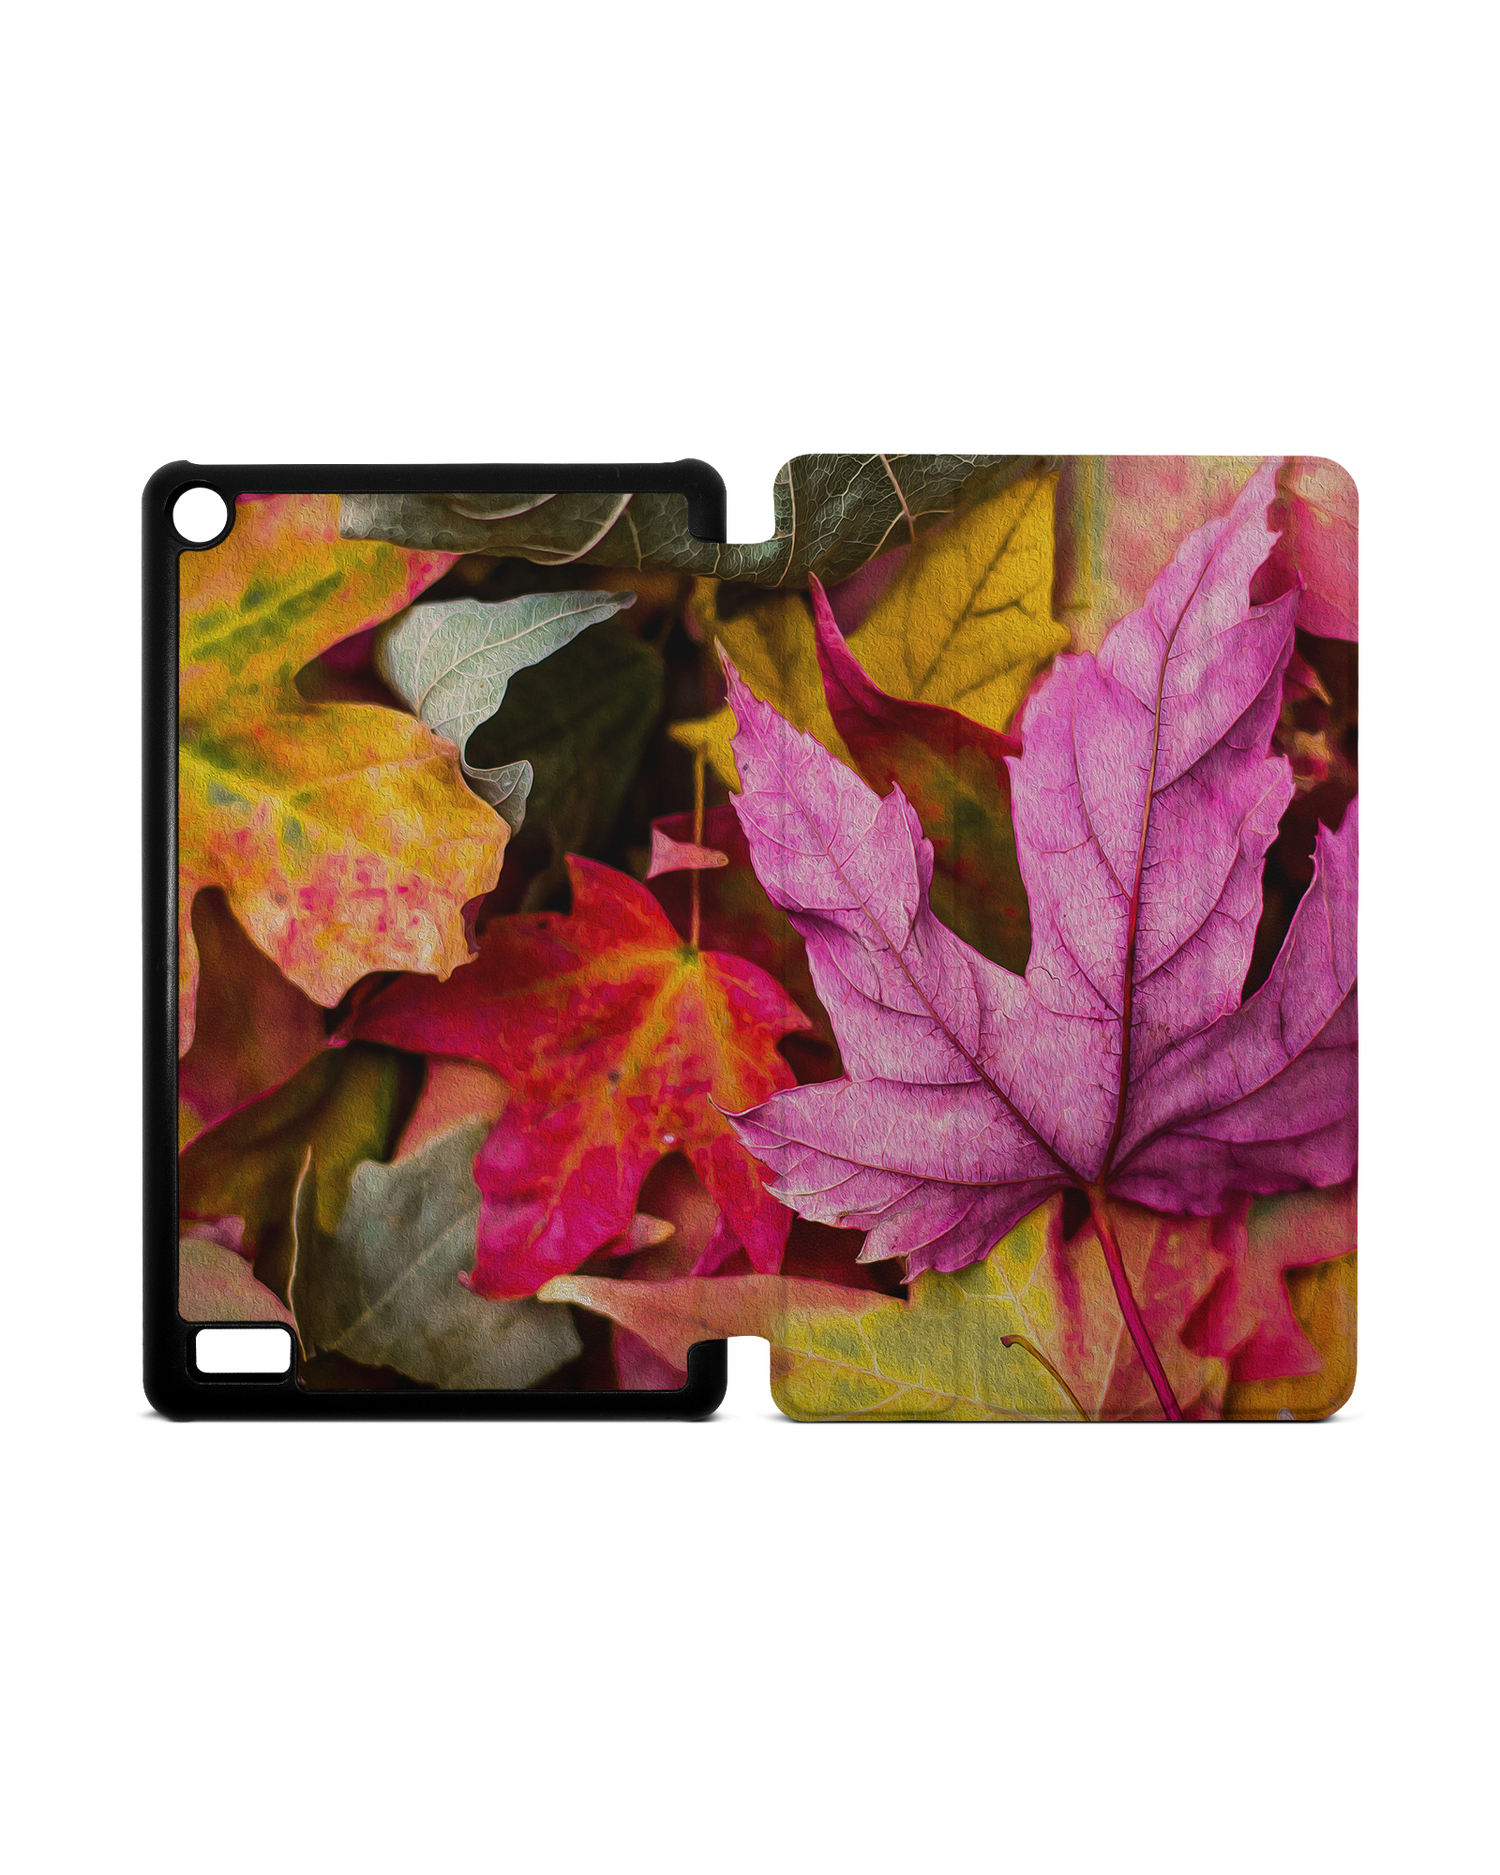 Autumn Leaves Tablet Smart Case for Amazon Fire 7: Opened